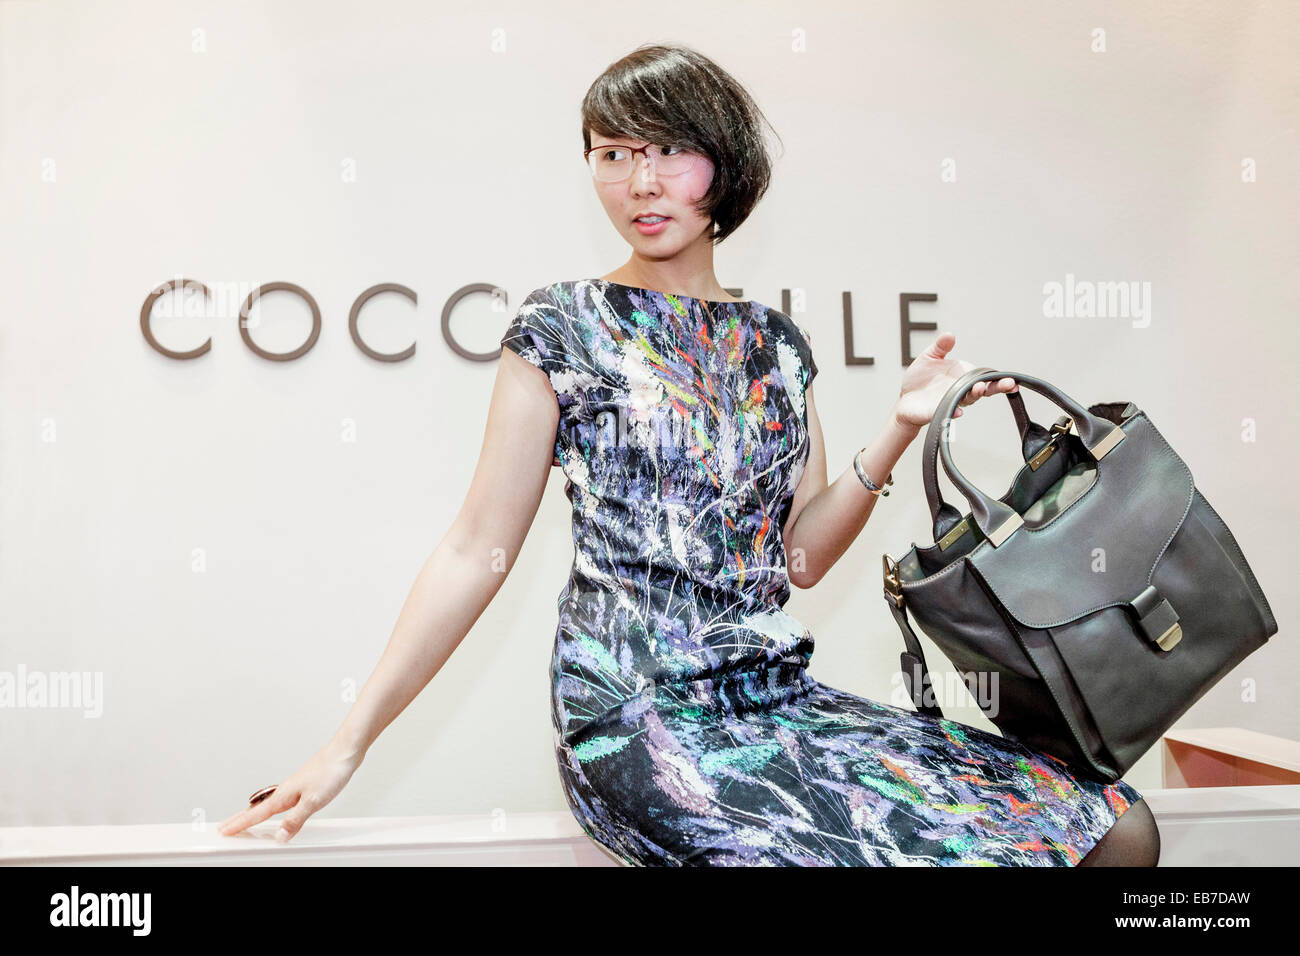 Young Asian woman with a handbag Coccinelle Stock Photo